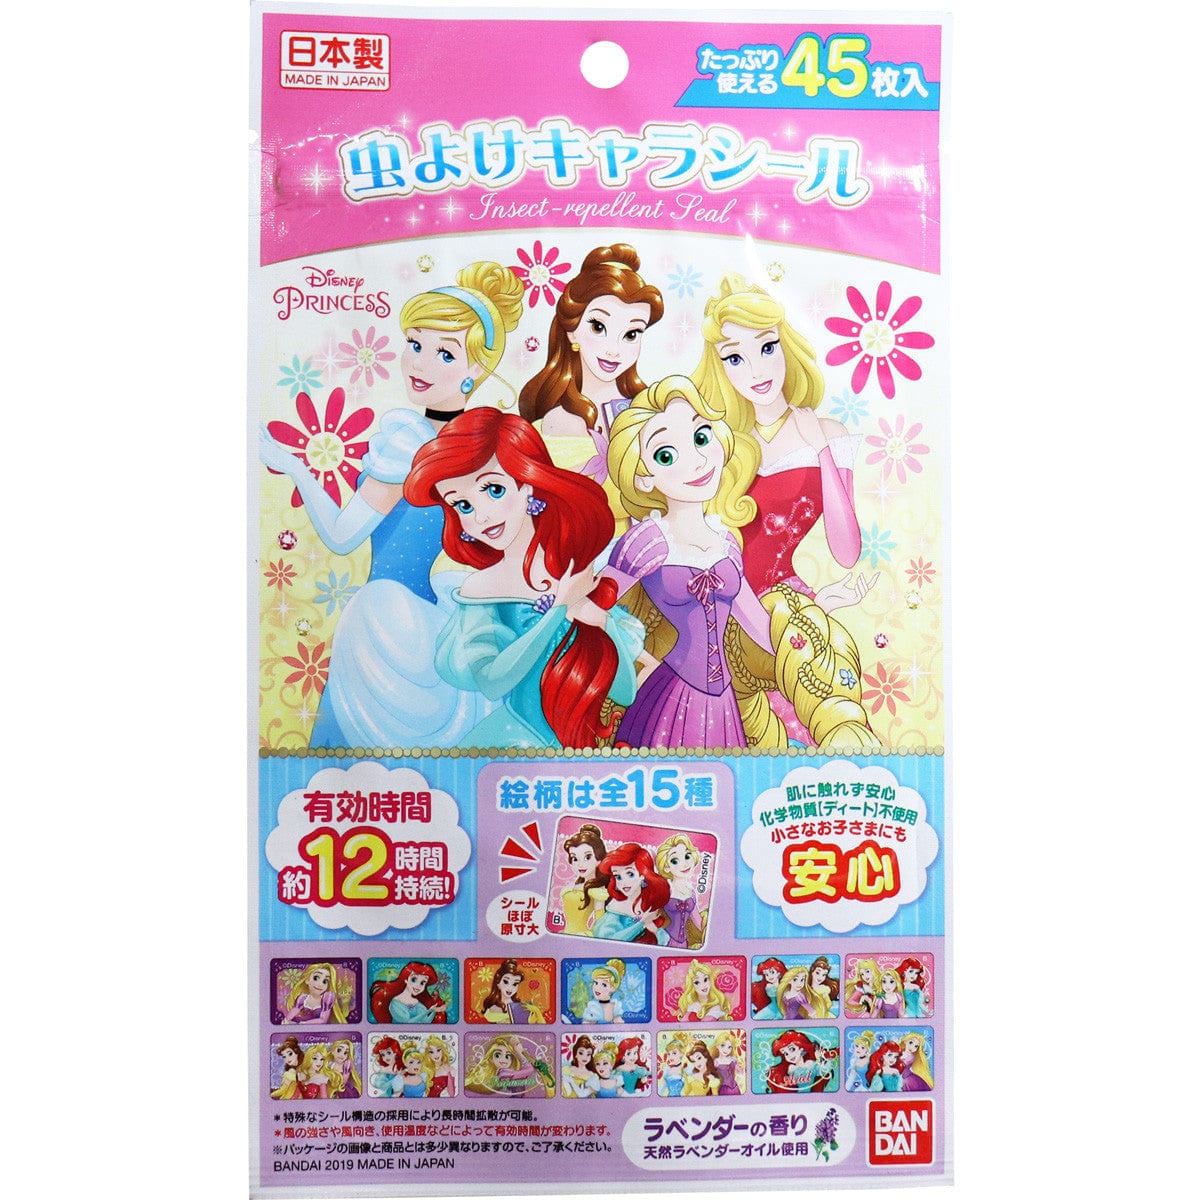 Bandai - Insect Repellent Seal Sticker Mosquito Patch (45 Pieces) - Disney Princess Insect Repellent Patch 4549660351658 Durio.sg